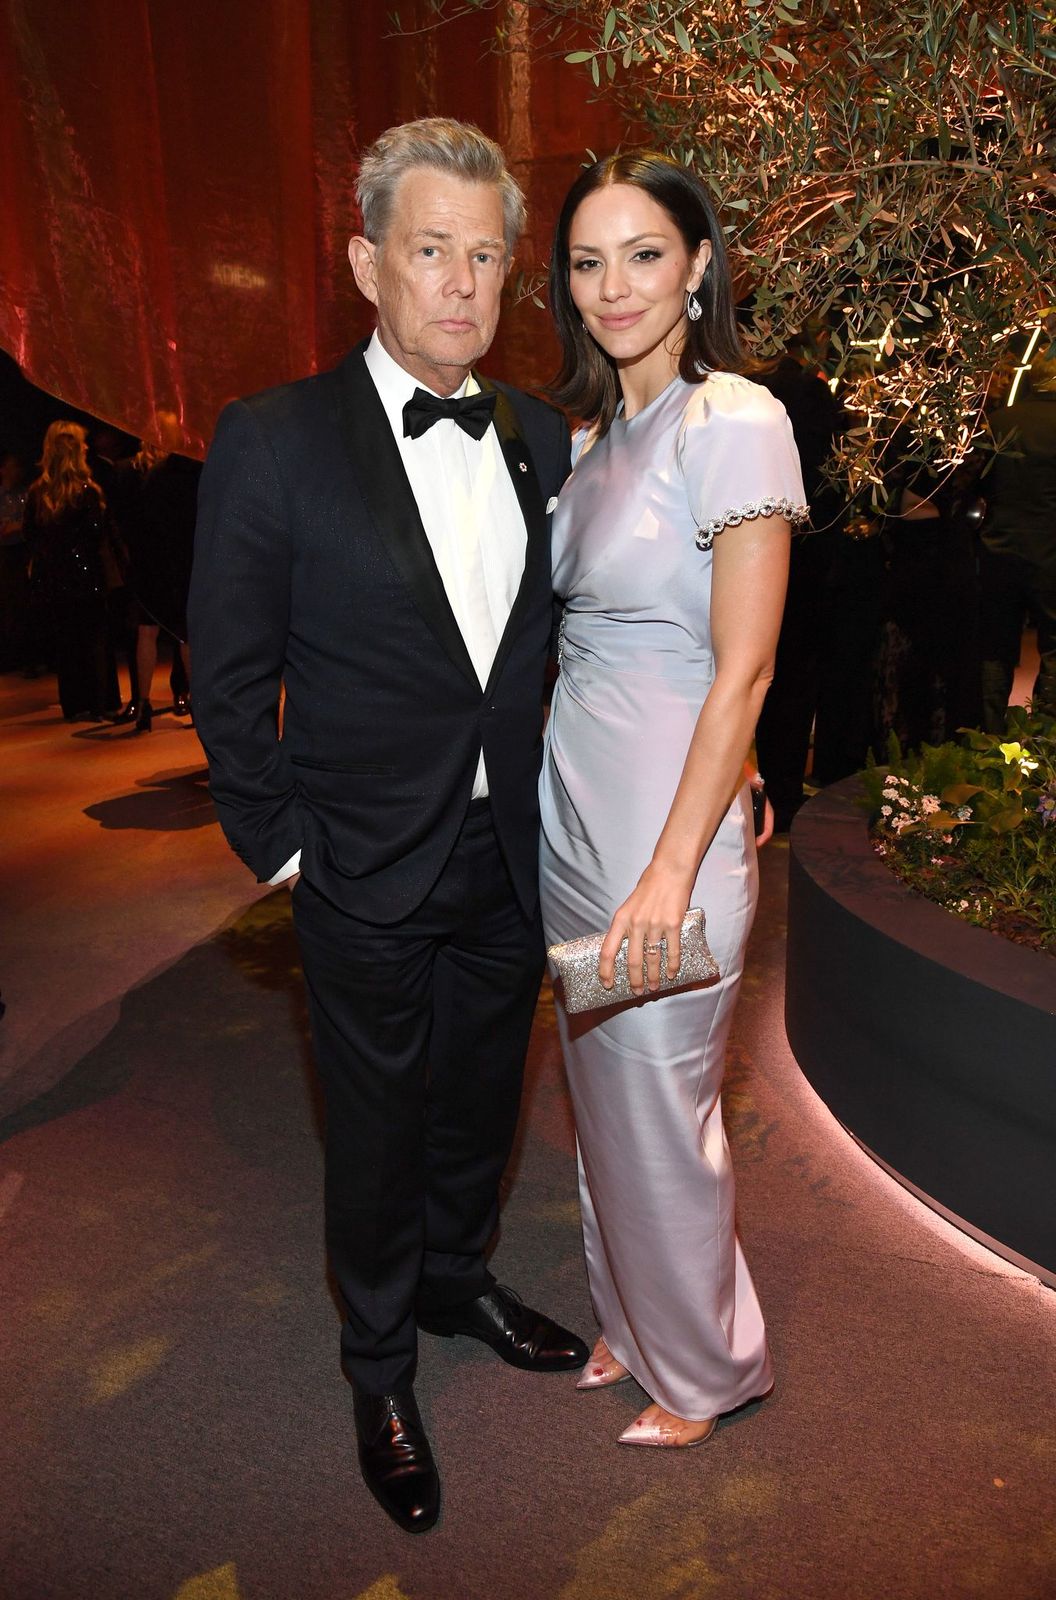 David Foster and Katharine McPhee at the 2020 Vanity Fair Oscar Party at Wallis Annenberg Center for the Performing Arts on February 09, 2020 | Getty Images